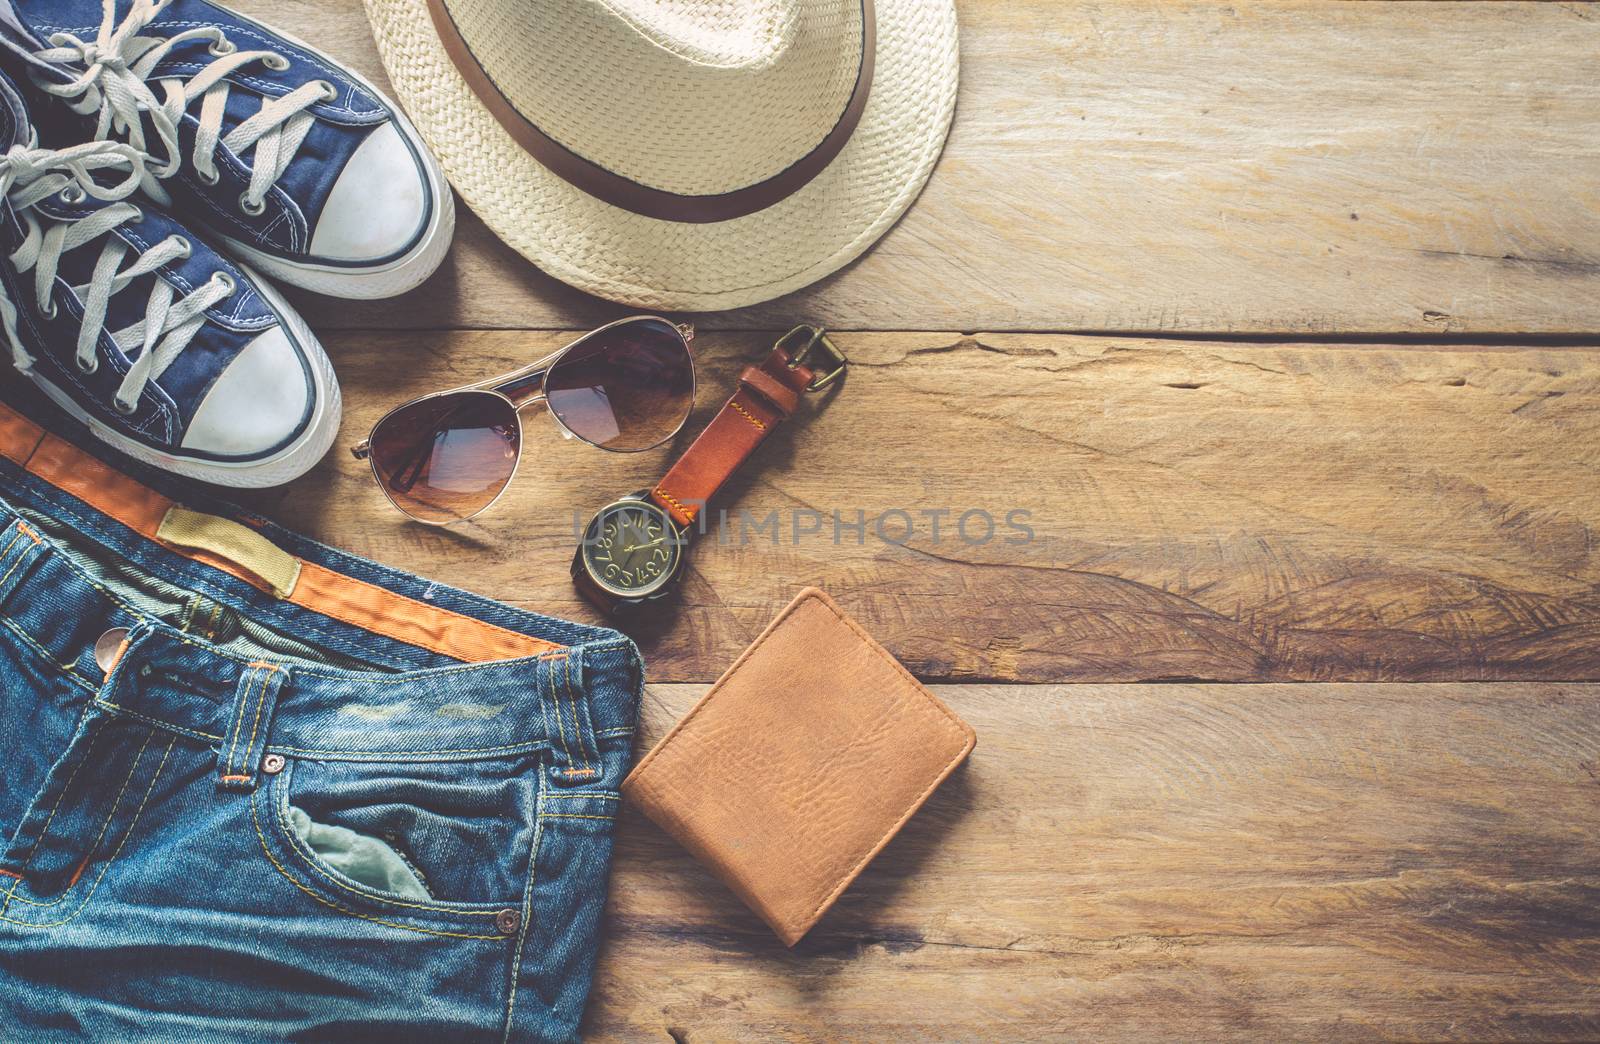 Clothing and accessories for travel on wood floor by photobyphotoboy